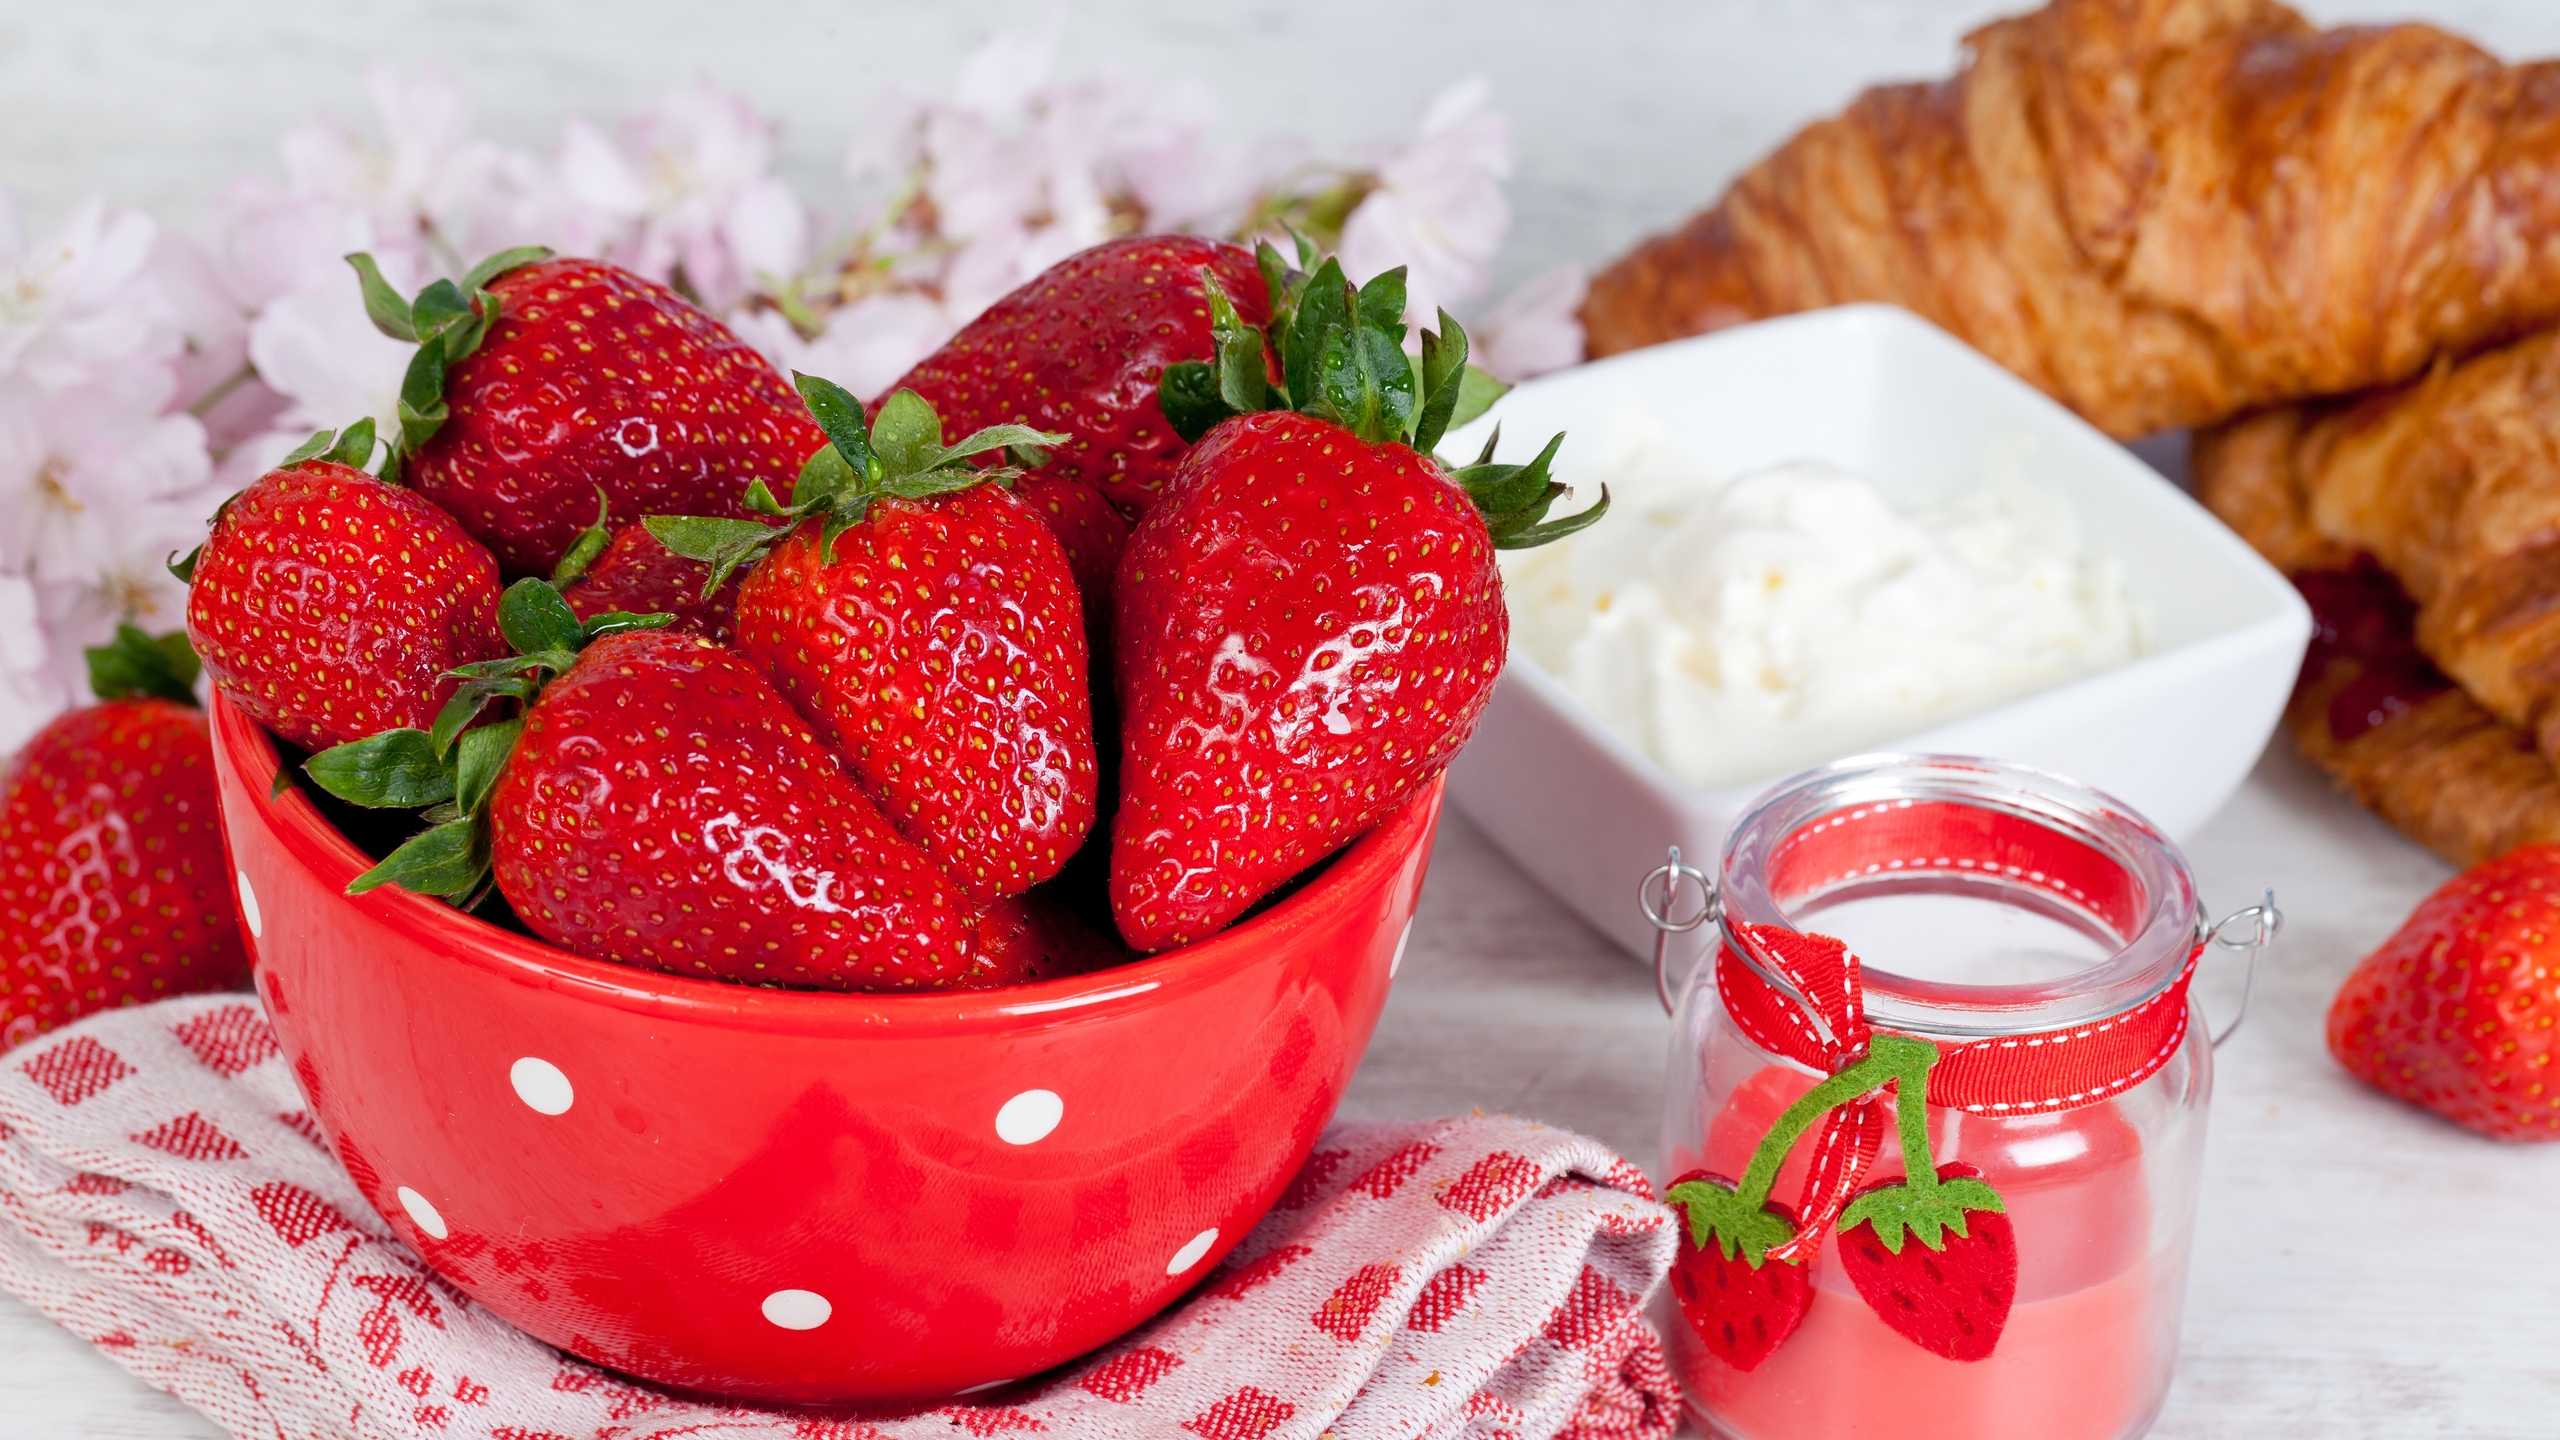 Strawberries and Sour Cream for 2560x1440 HDTV resolution